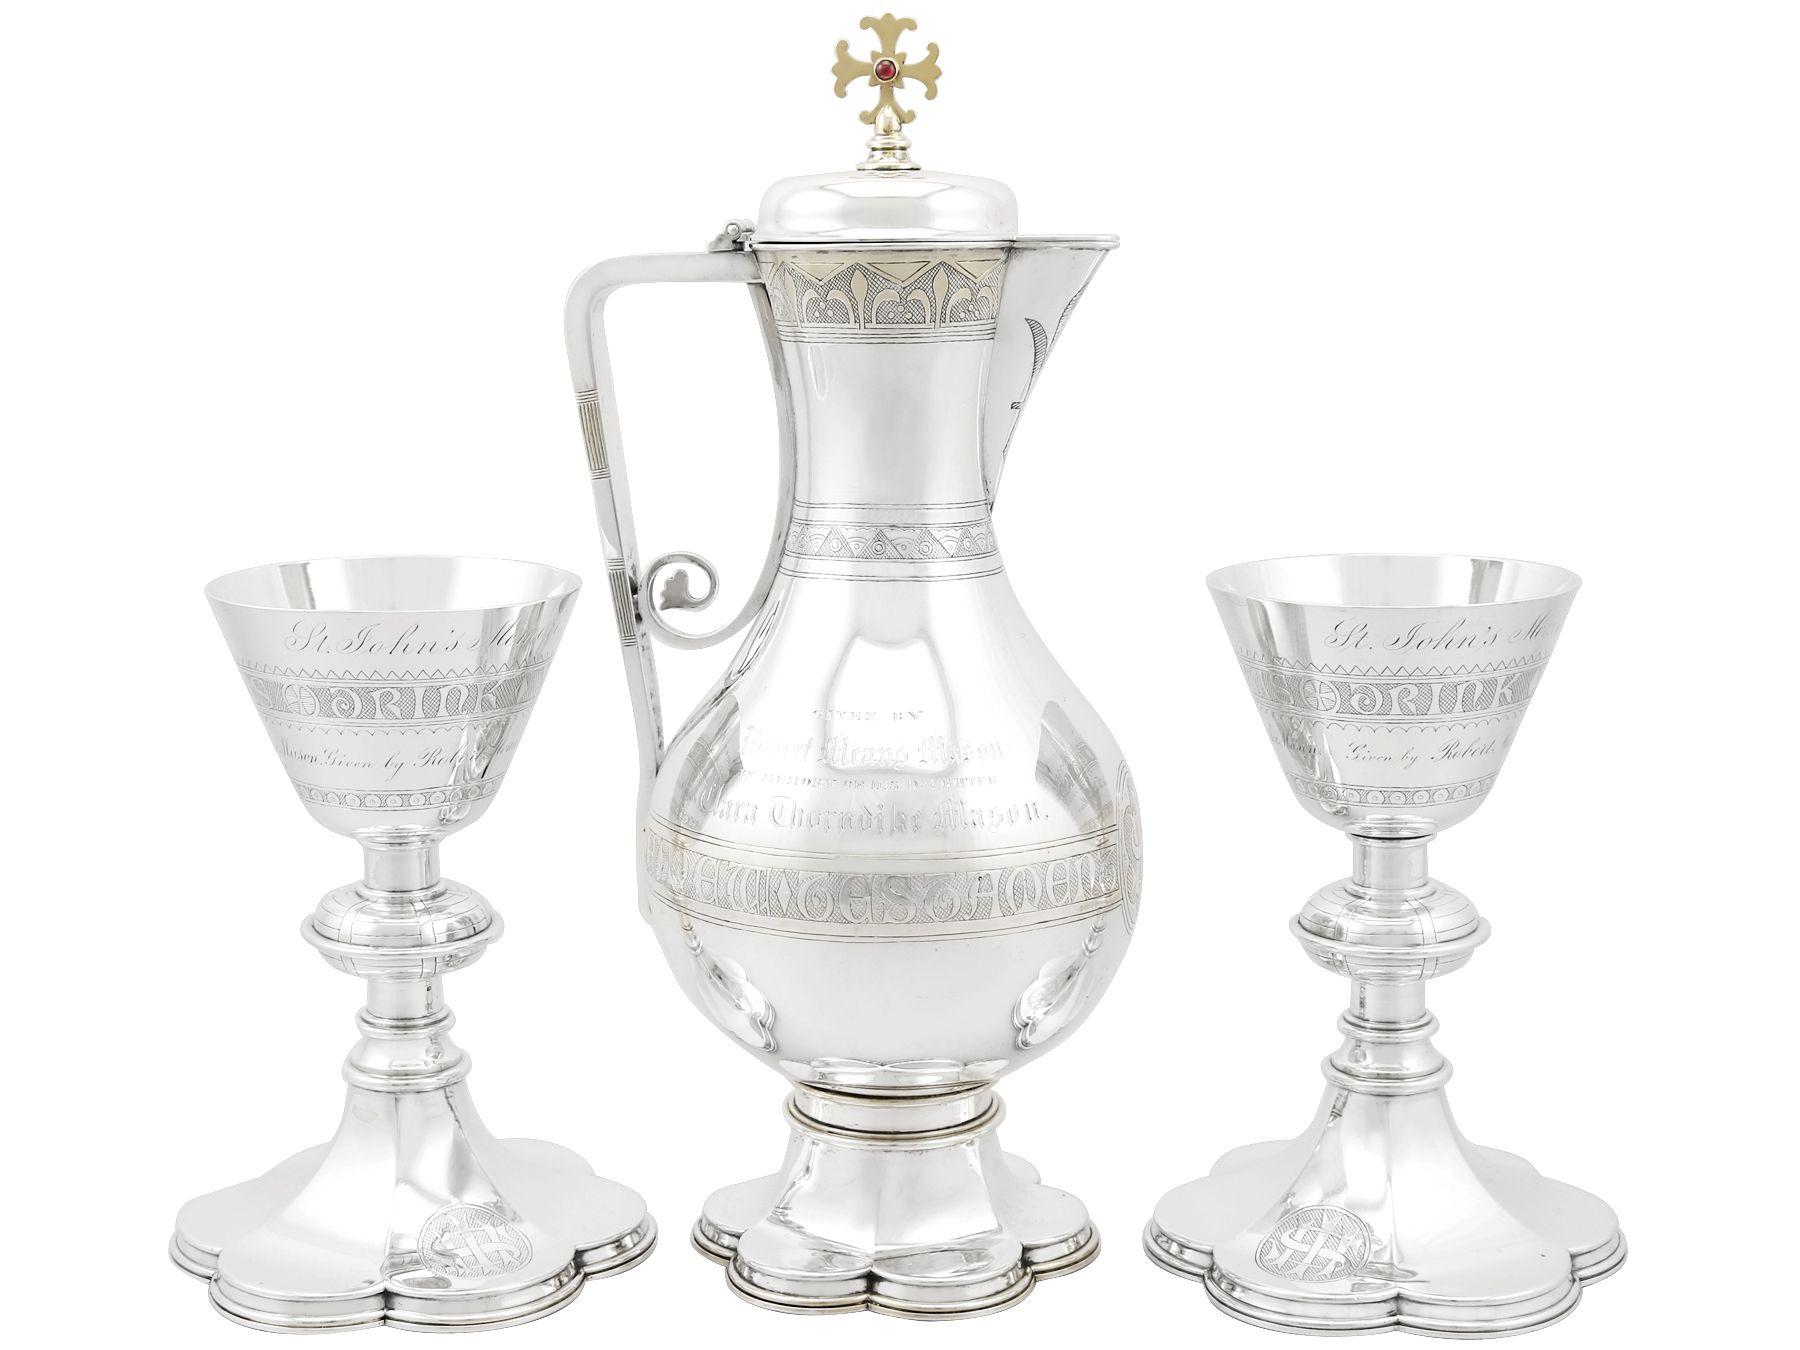 An exceptional, fine and impressive antique English sterling silver communion set; an addition to our diverse religious silverware collection.

This exceptional antique Victorian sterling silver communion set consists of a flagon, a large